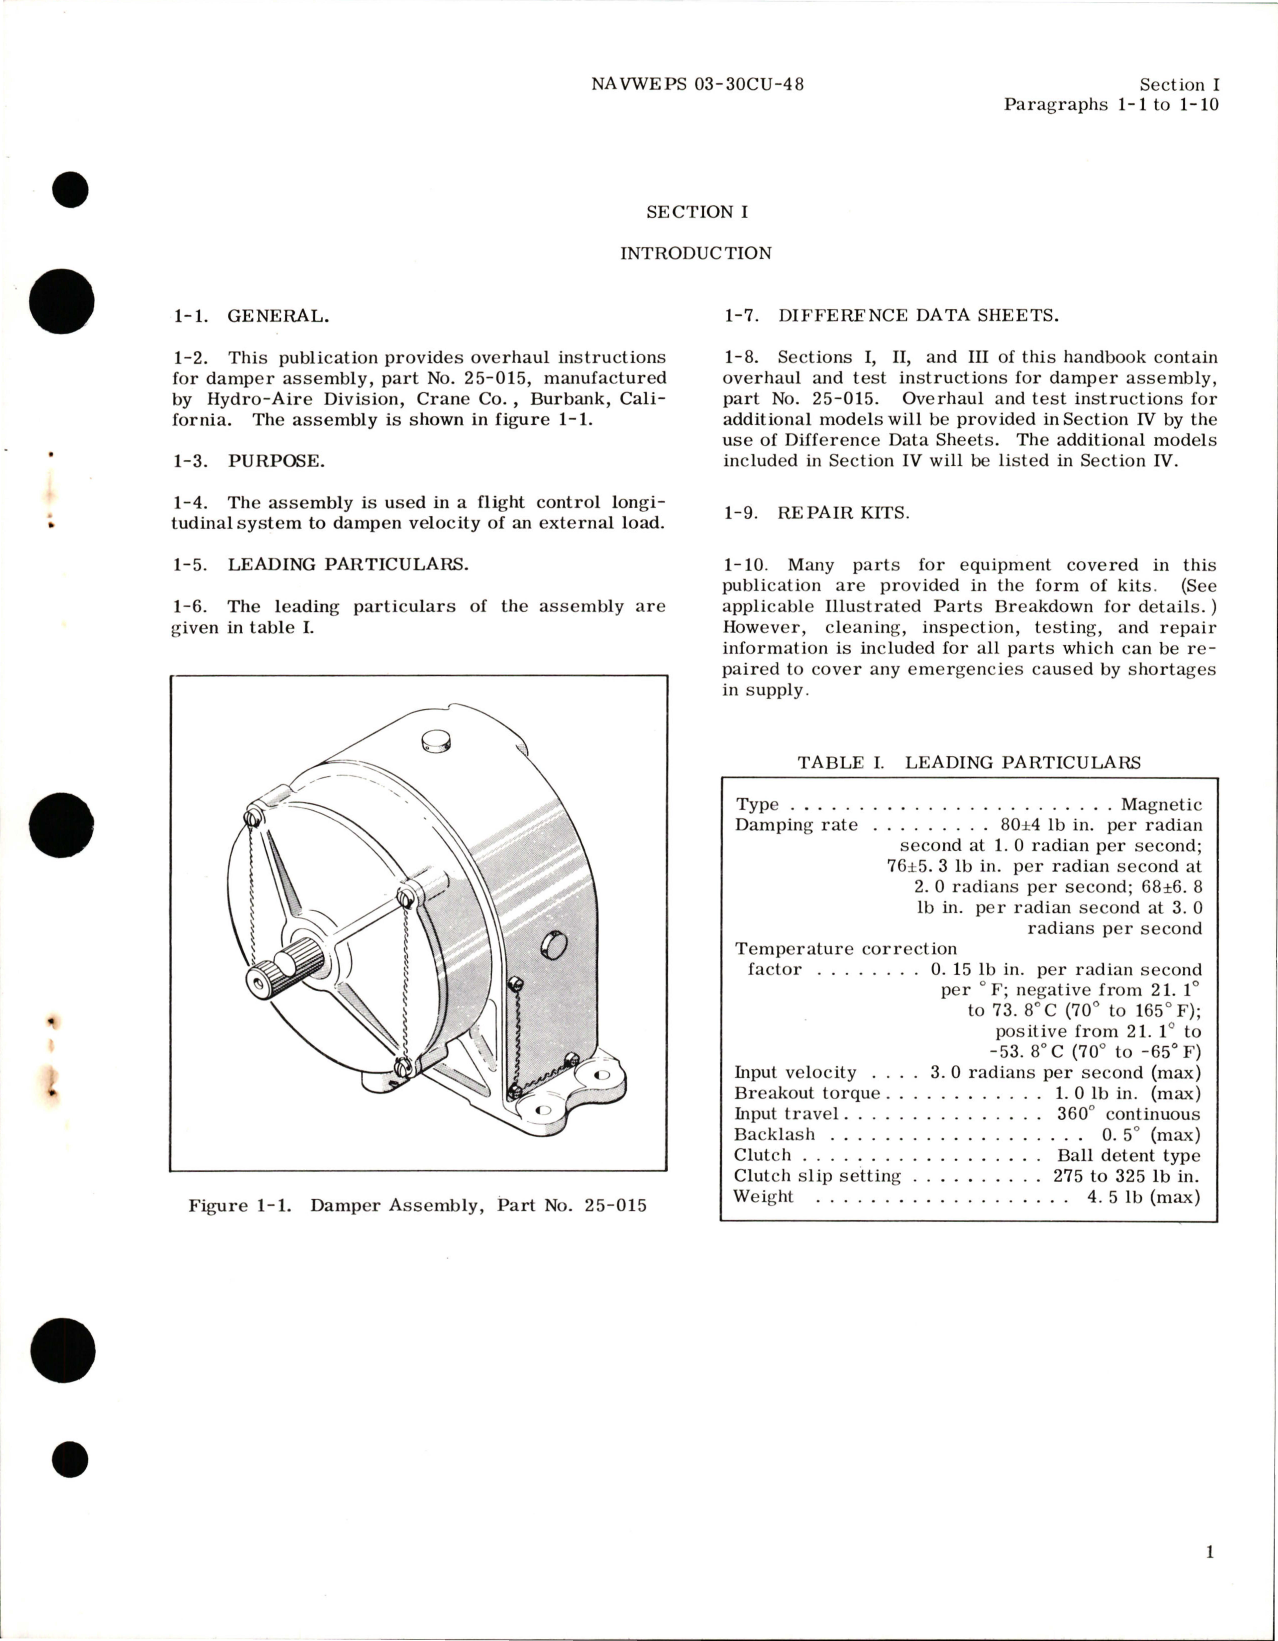 Sample page 5 from AirCorps Library document: Overhaul Instructions for Damper Assembly - Part 25-015